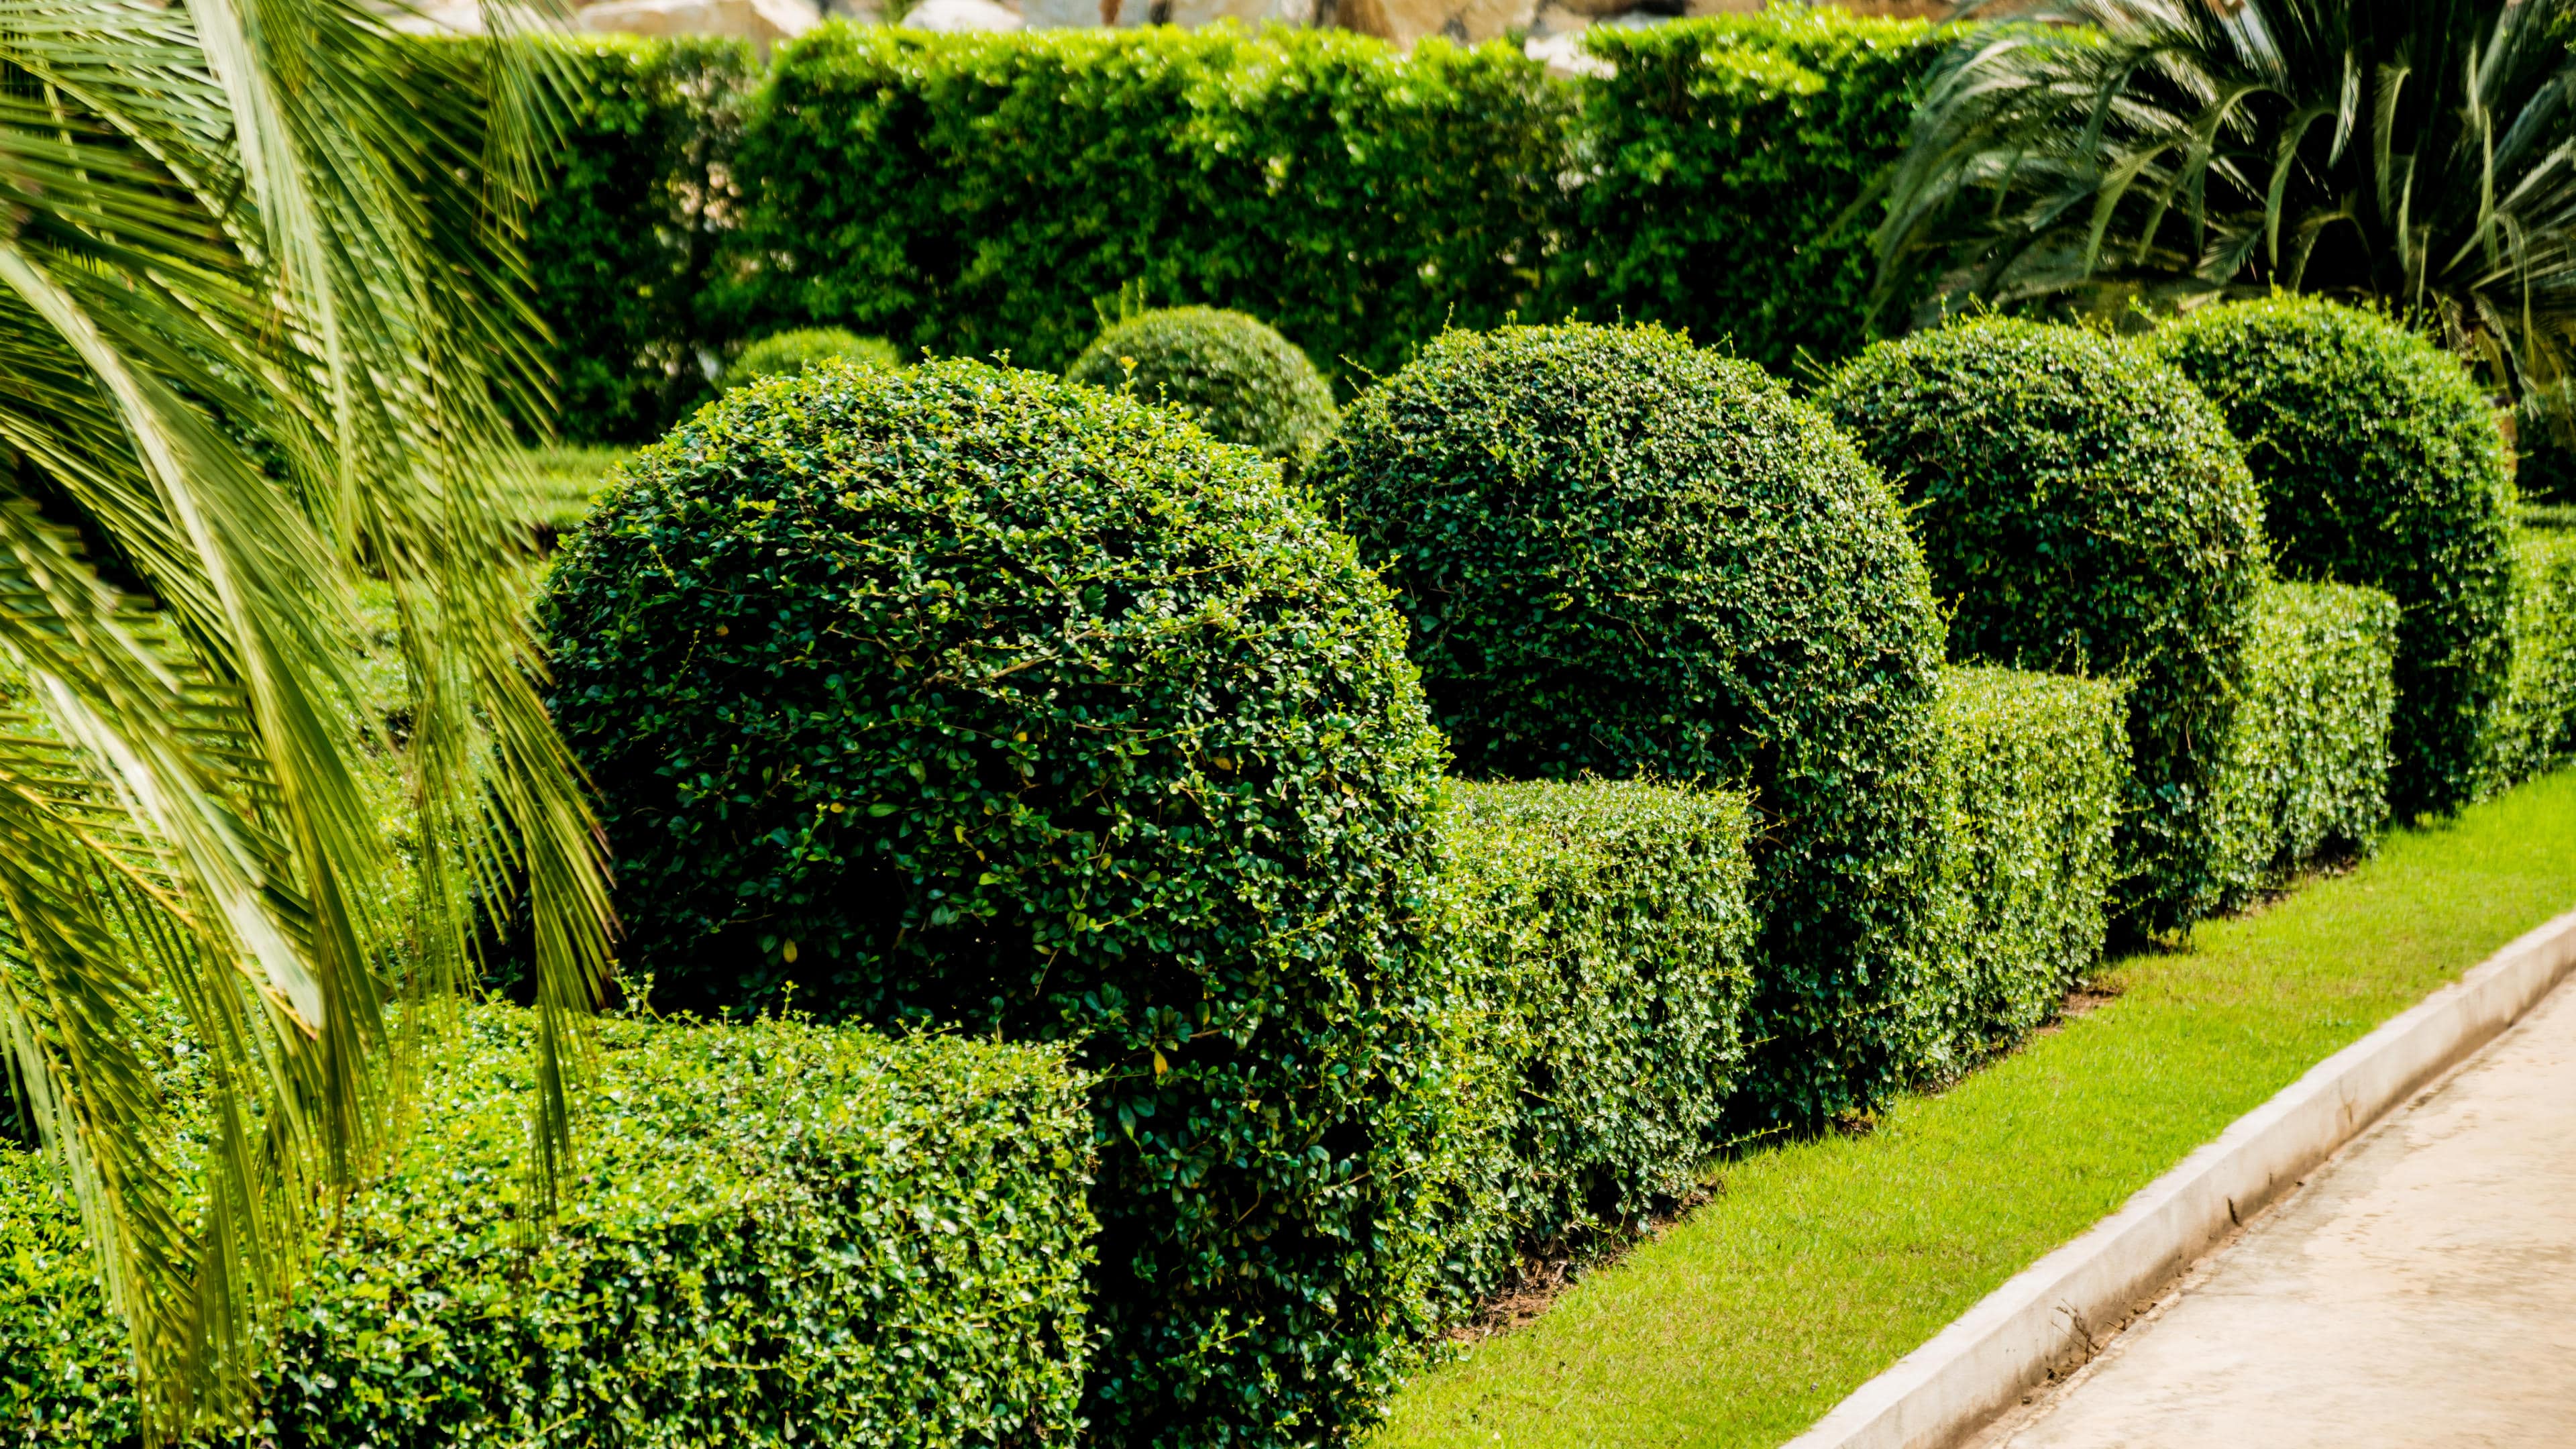 Sculpted Hedges Illustrating our Tree Trimming Service